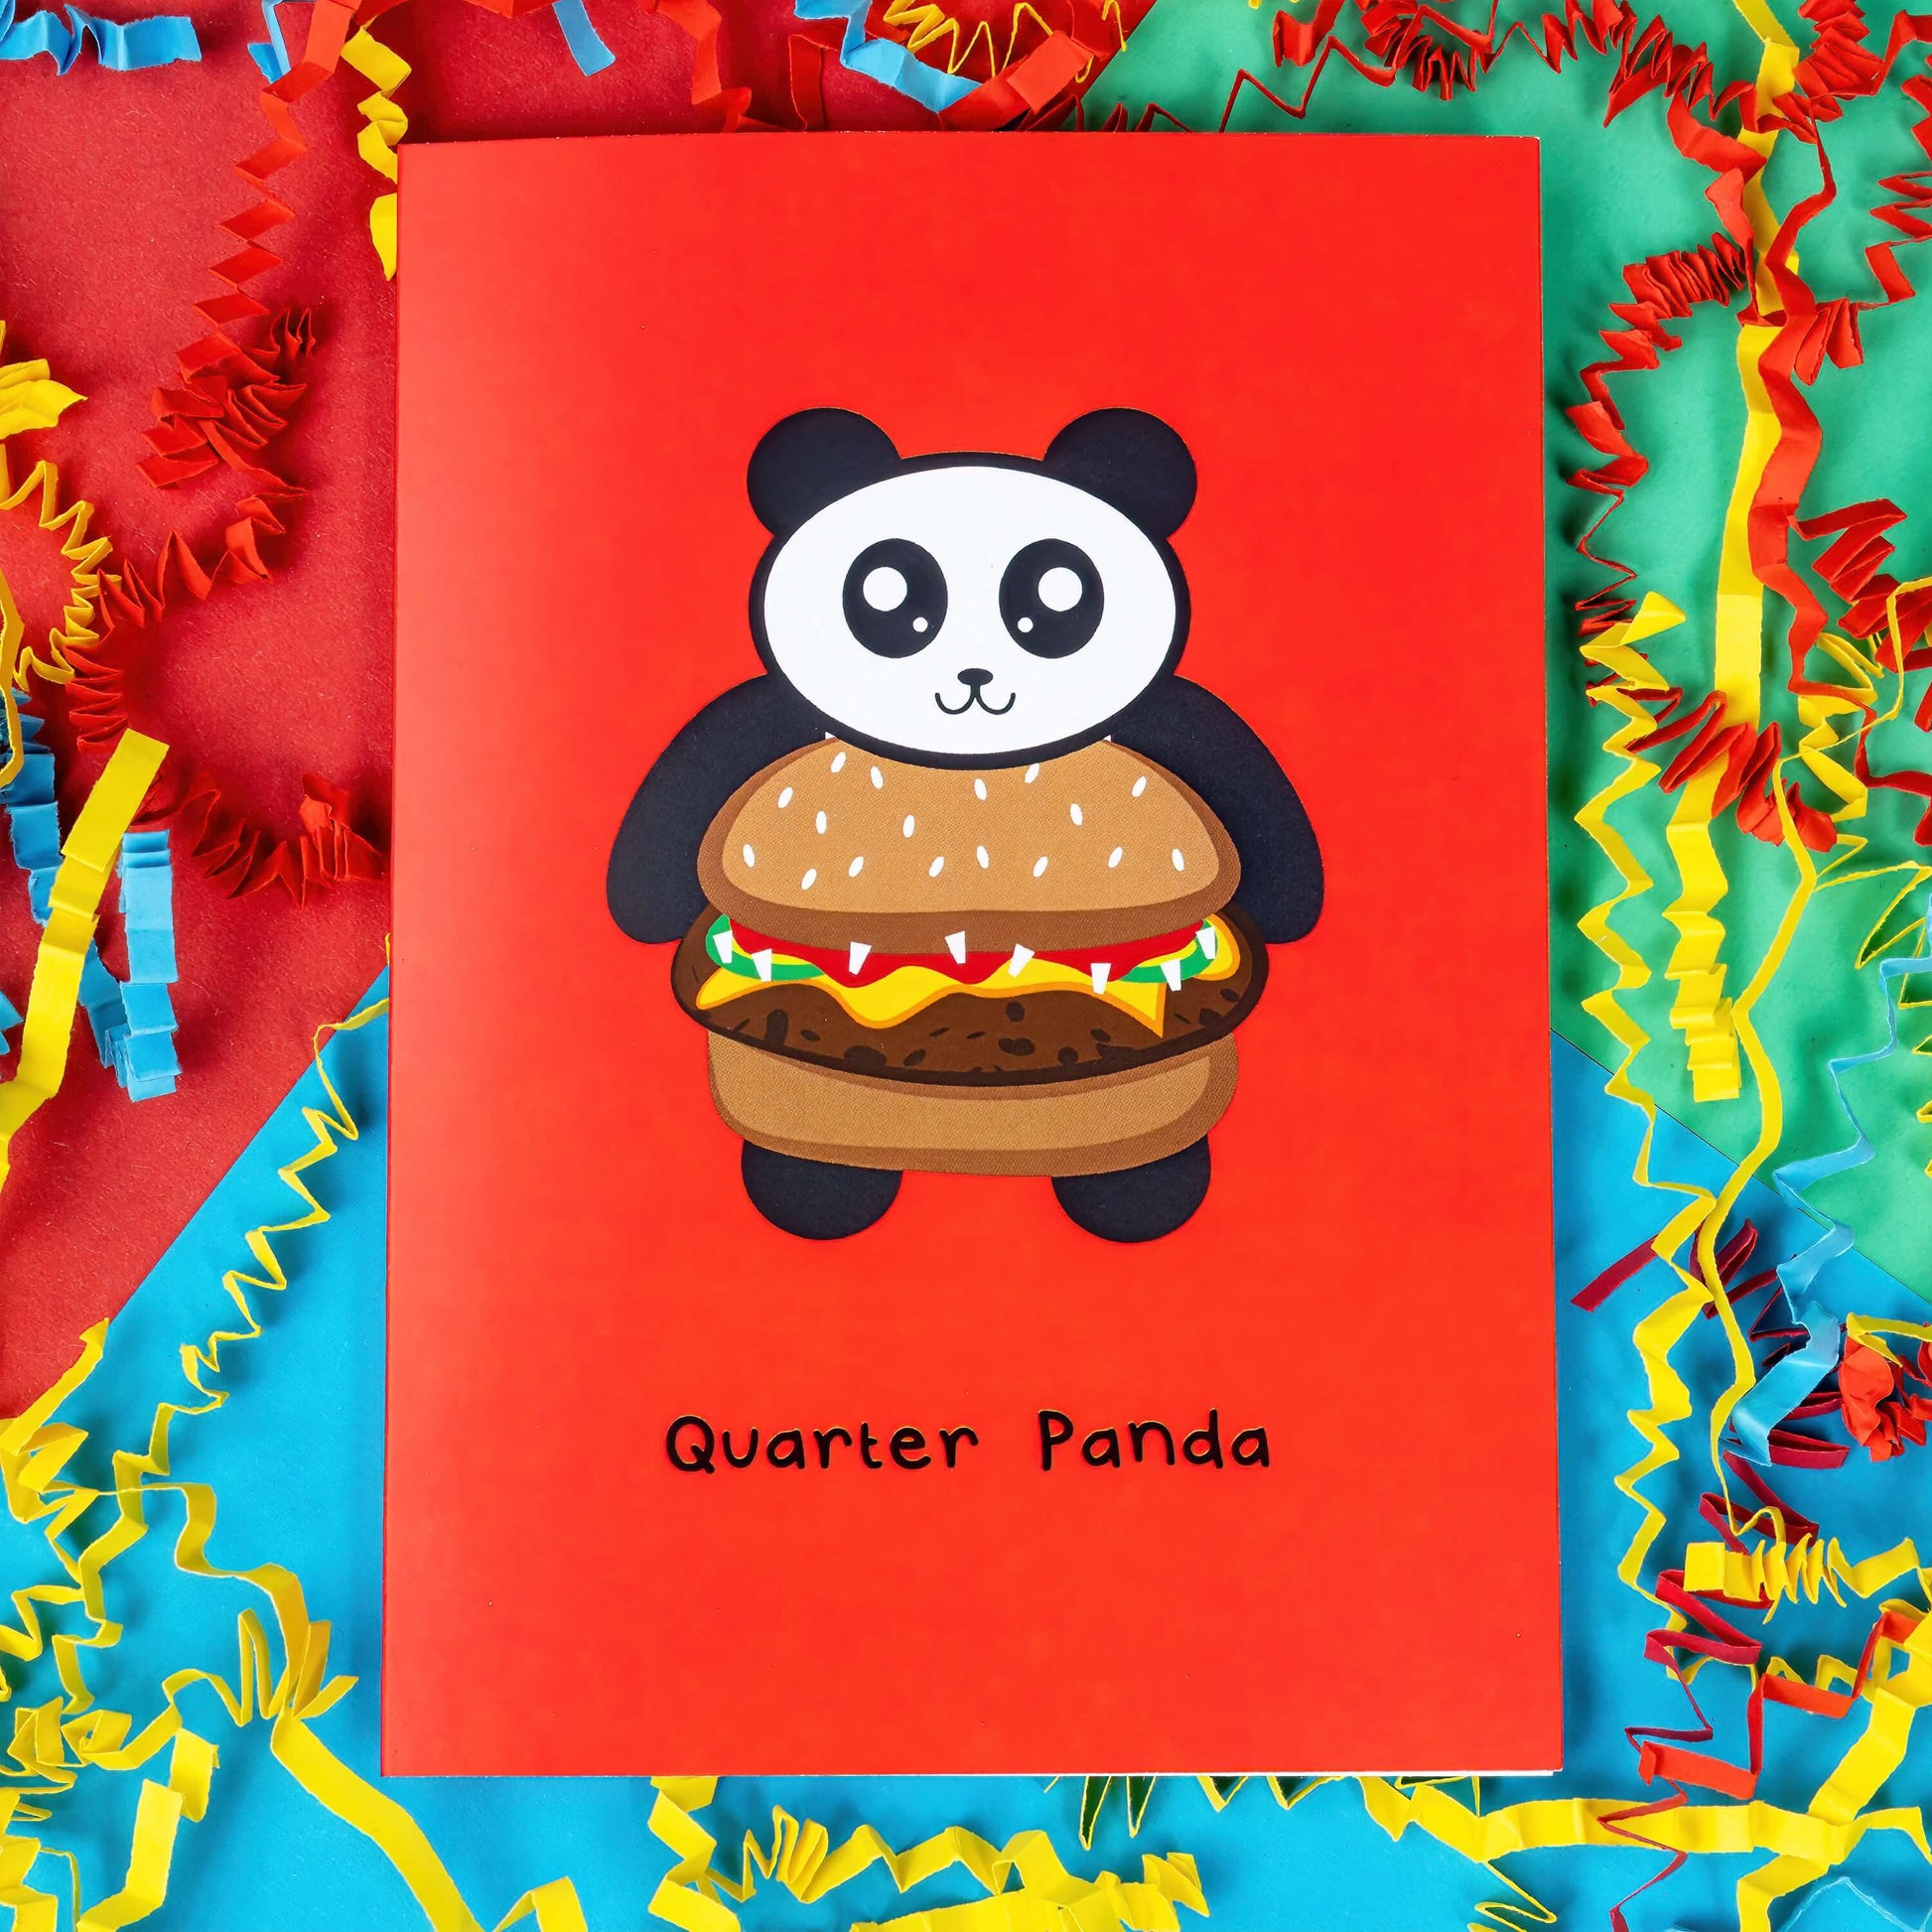 The Quarter Panda Burger Card on a red, blue and green background with yellow, red and blue crinkle card confetti. The red a6 greeting card has a smiling panda with its body being a seeded bun burger. Underneath in black reads 'quarter panda'.